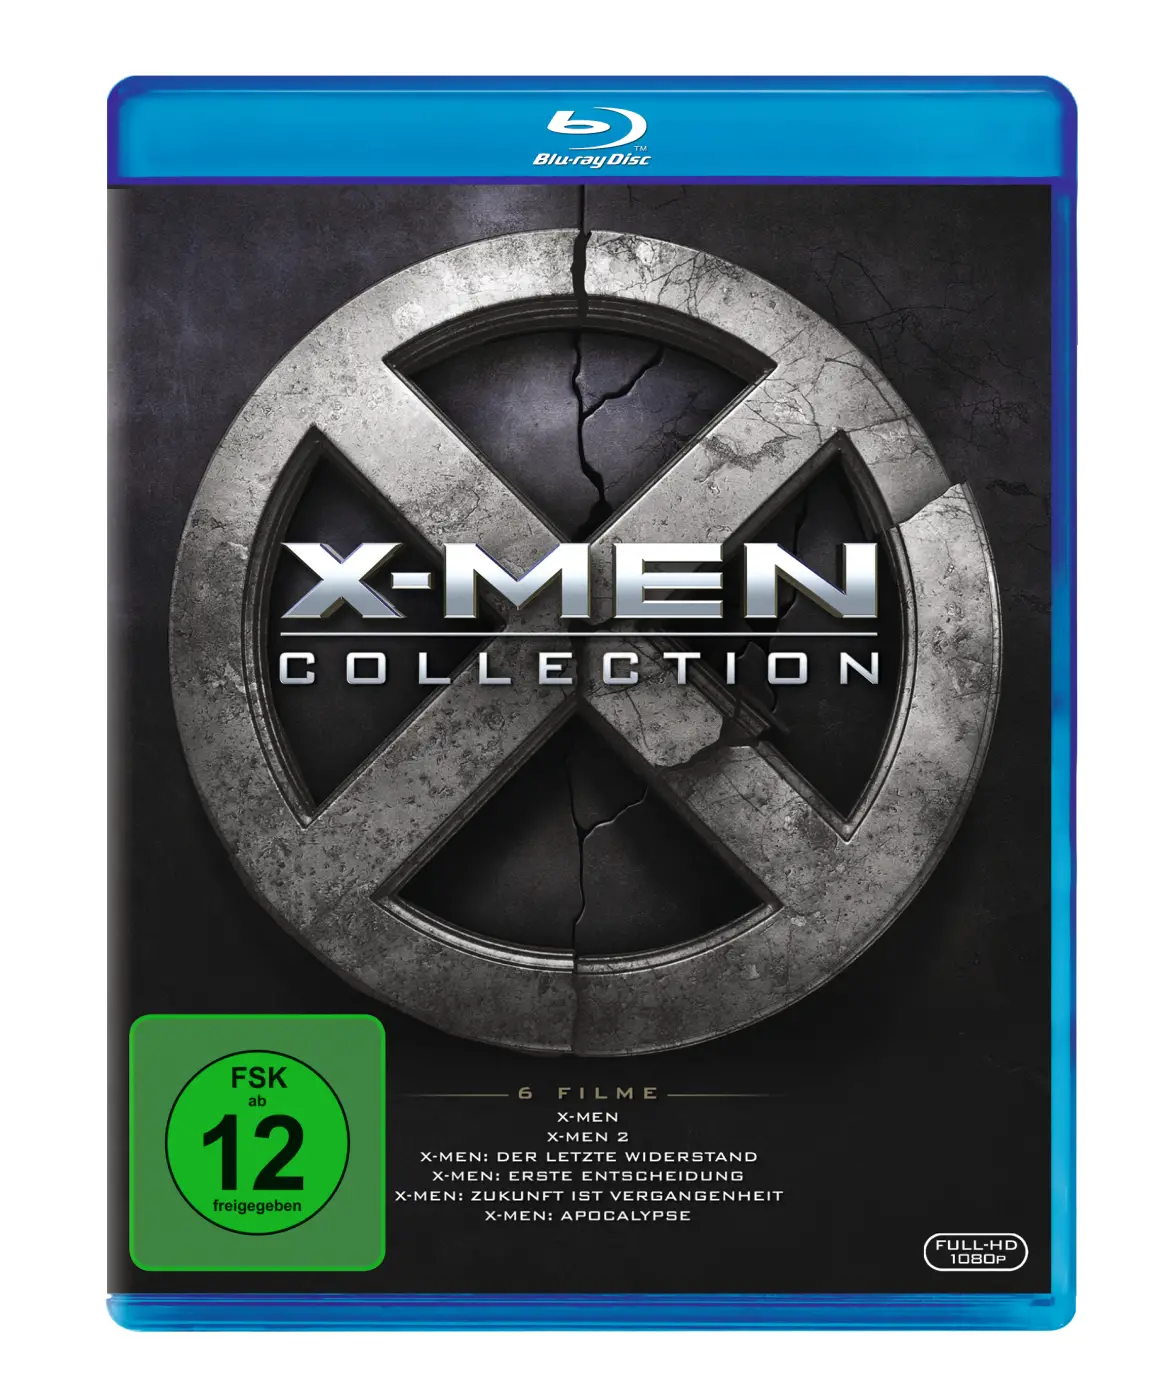 X-Men Collection - Blu-ray Cover